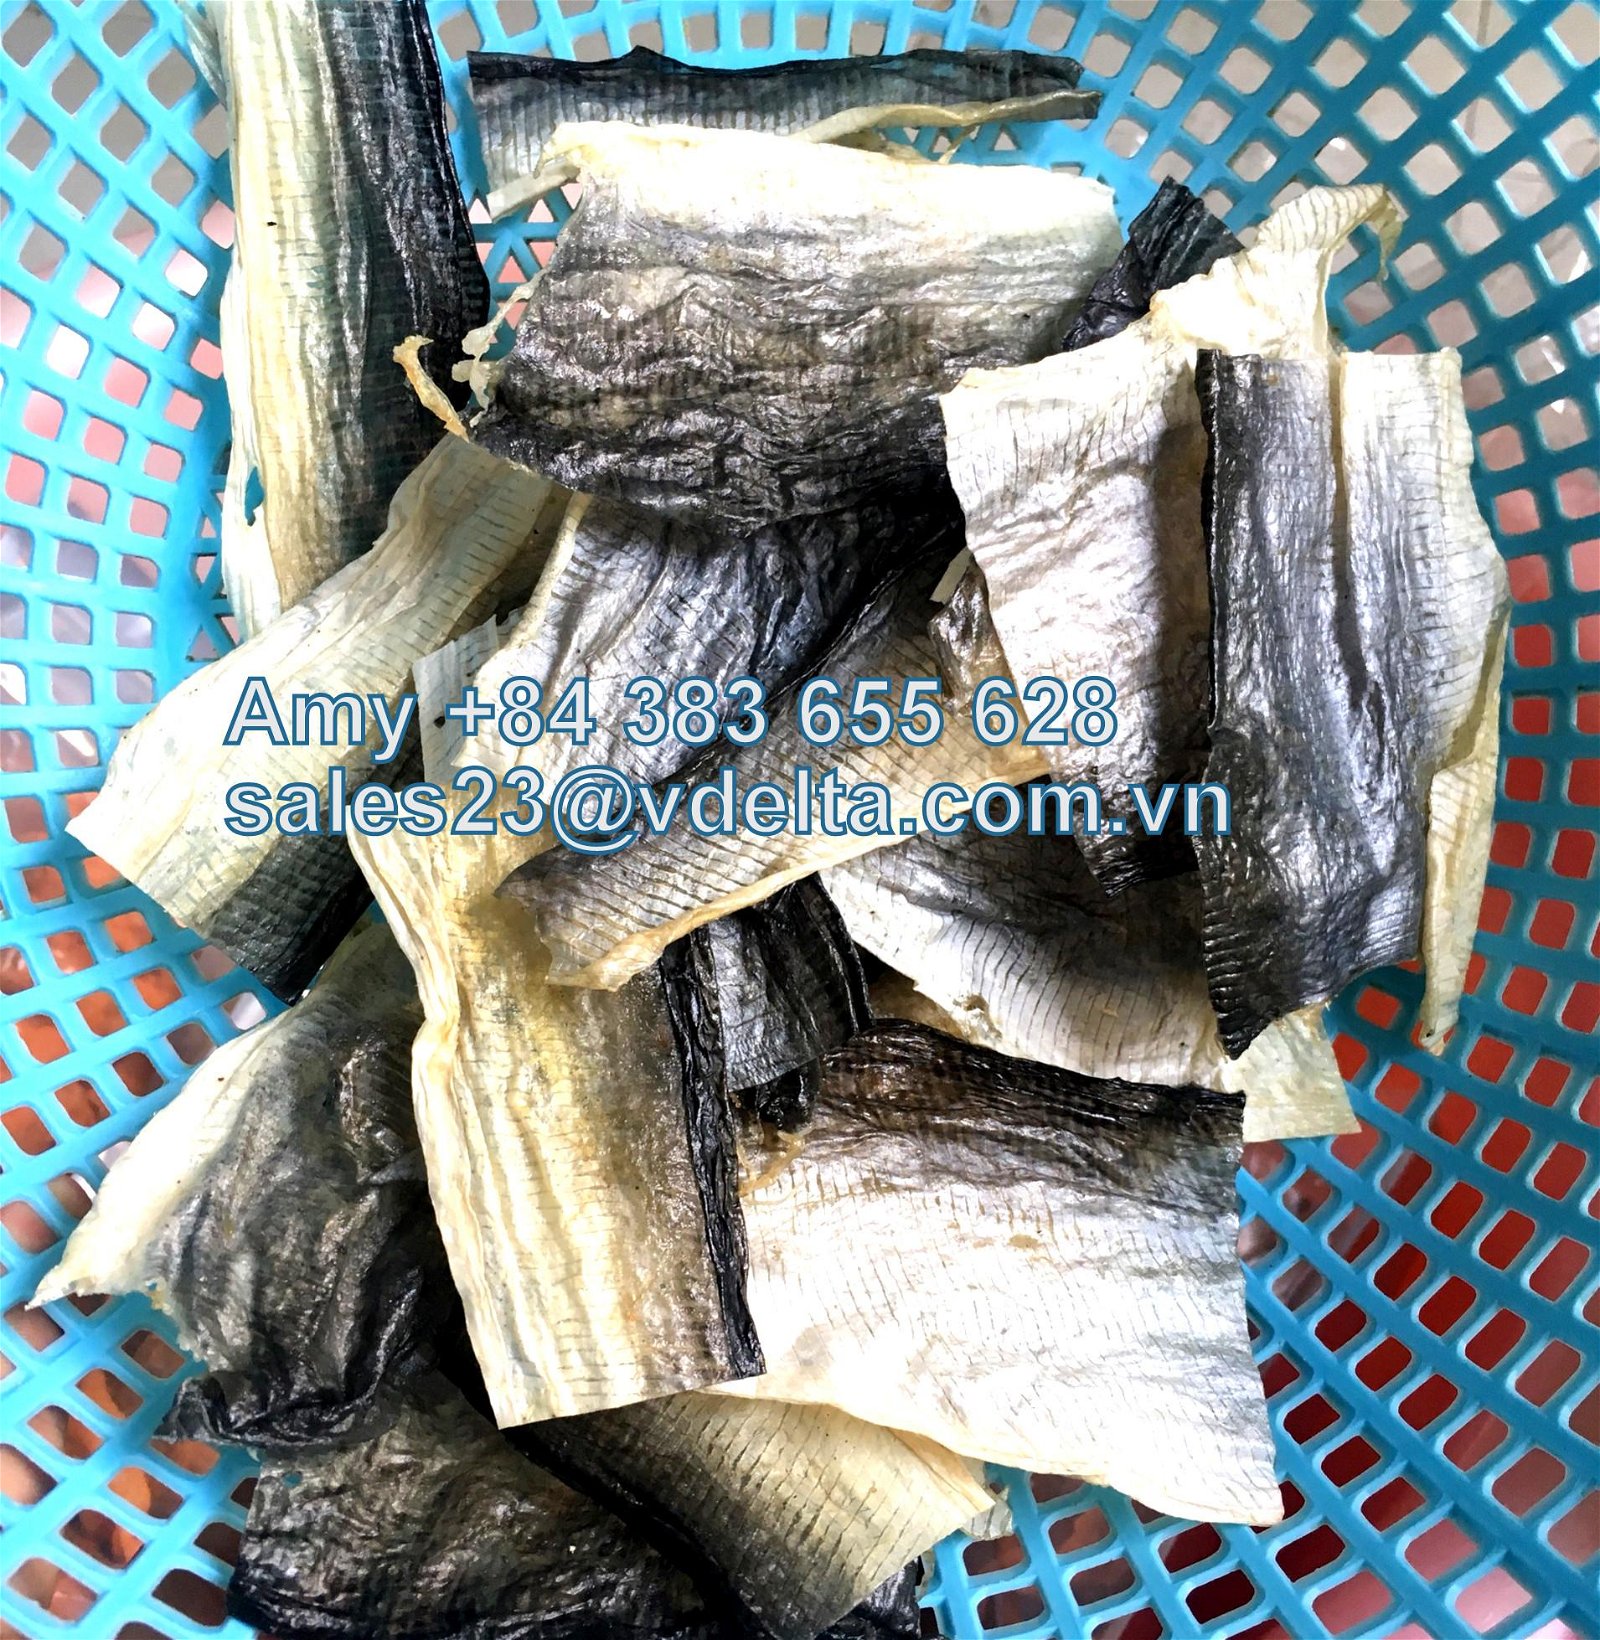 EXTRACTION COLLAGEN FROM DRIED PANGASIUS FISH SKIN 3